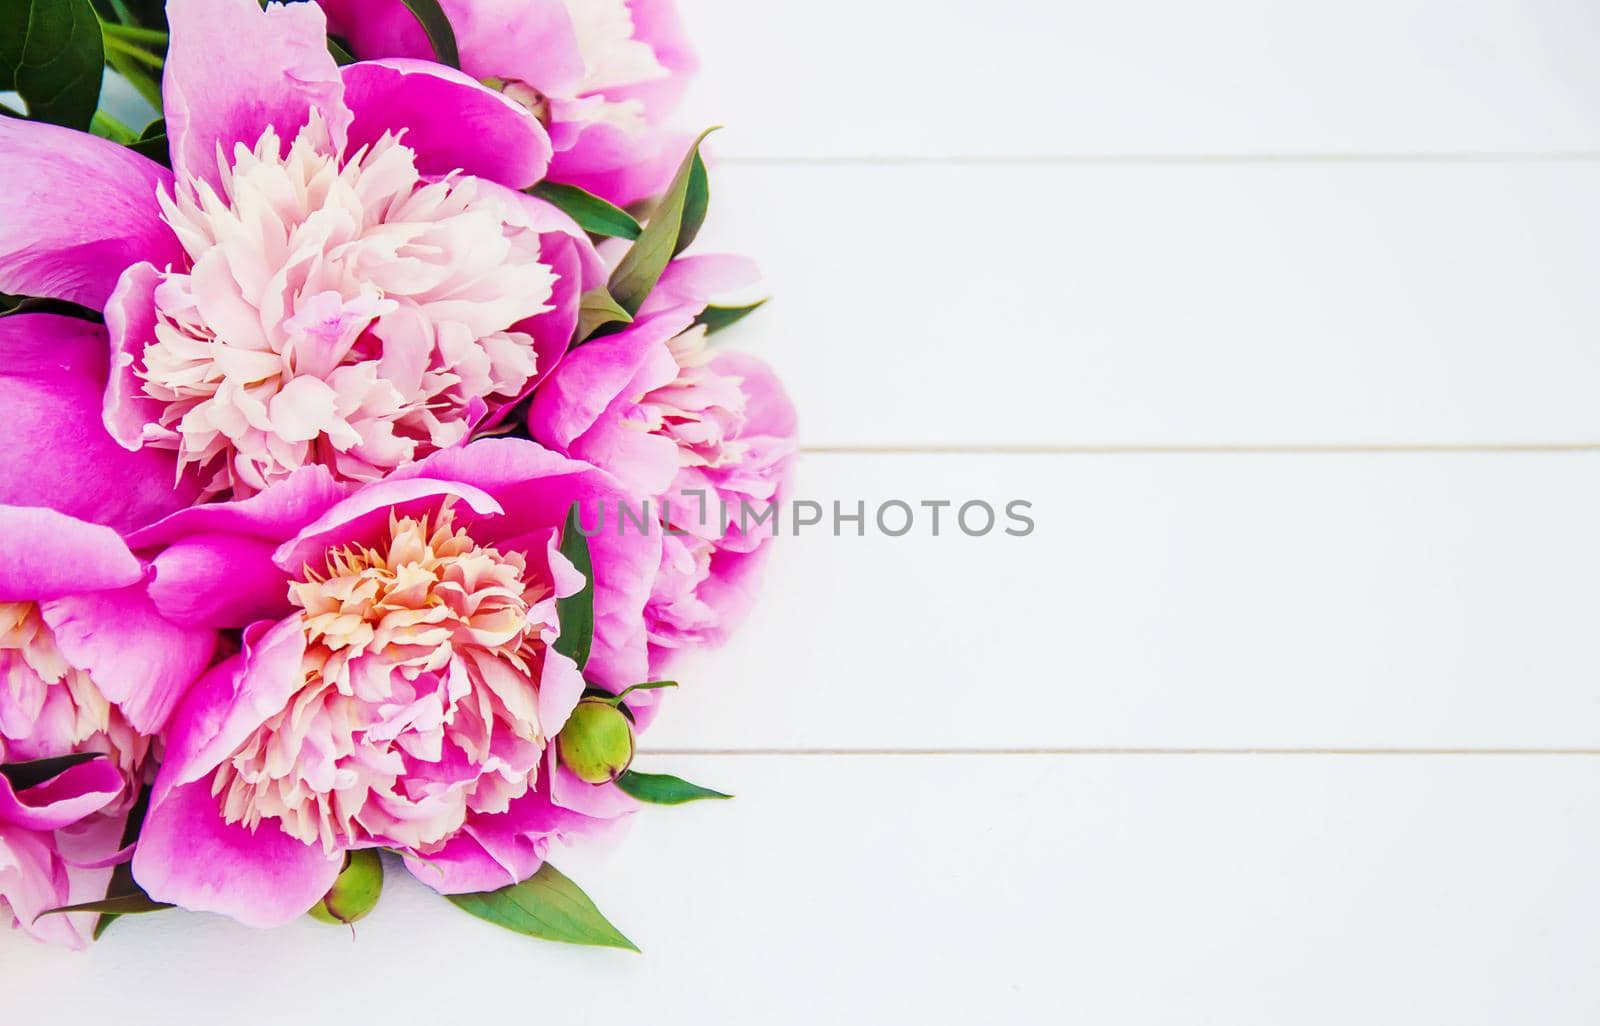 flowers peonies on a white background. selective focus.